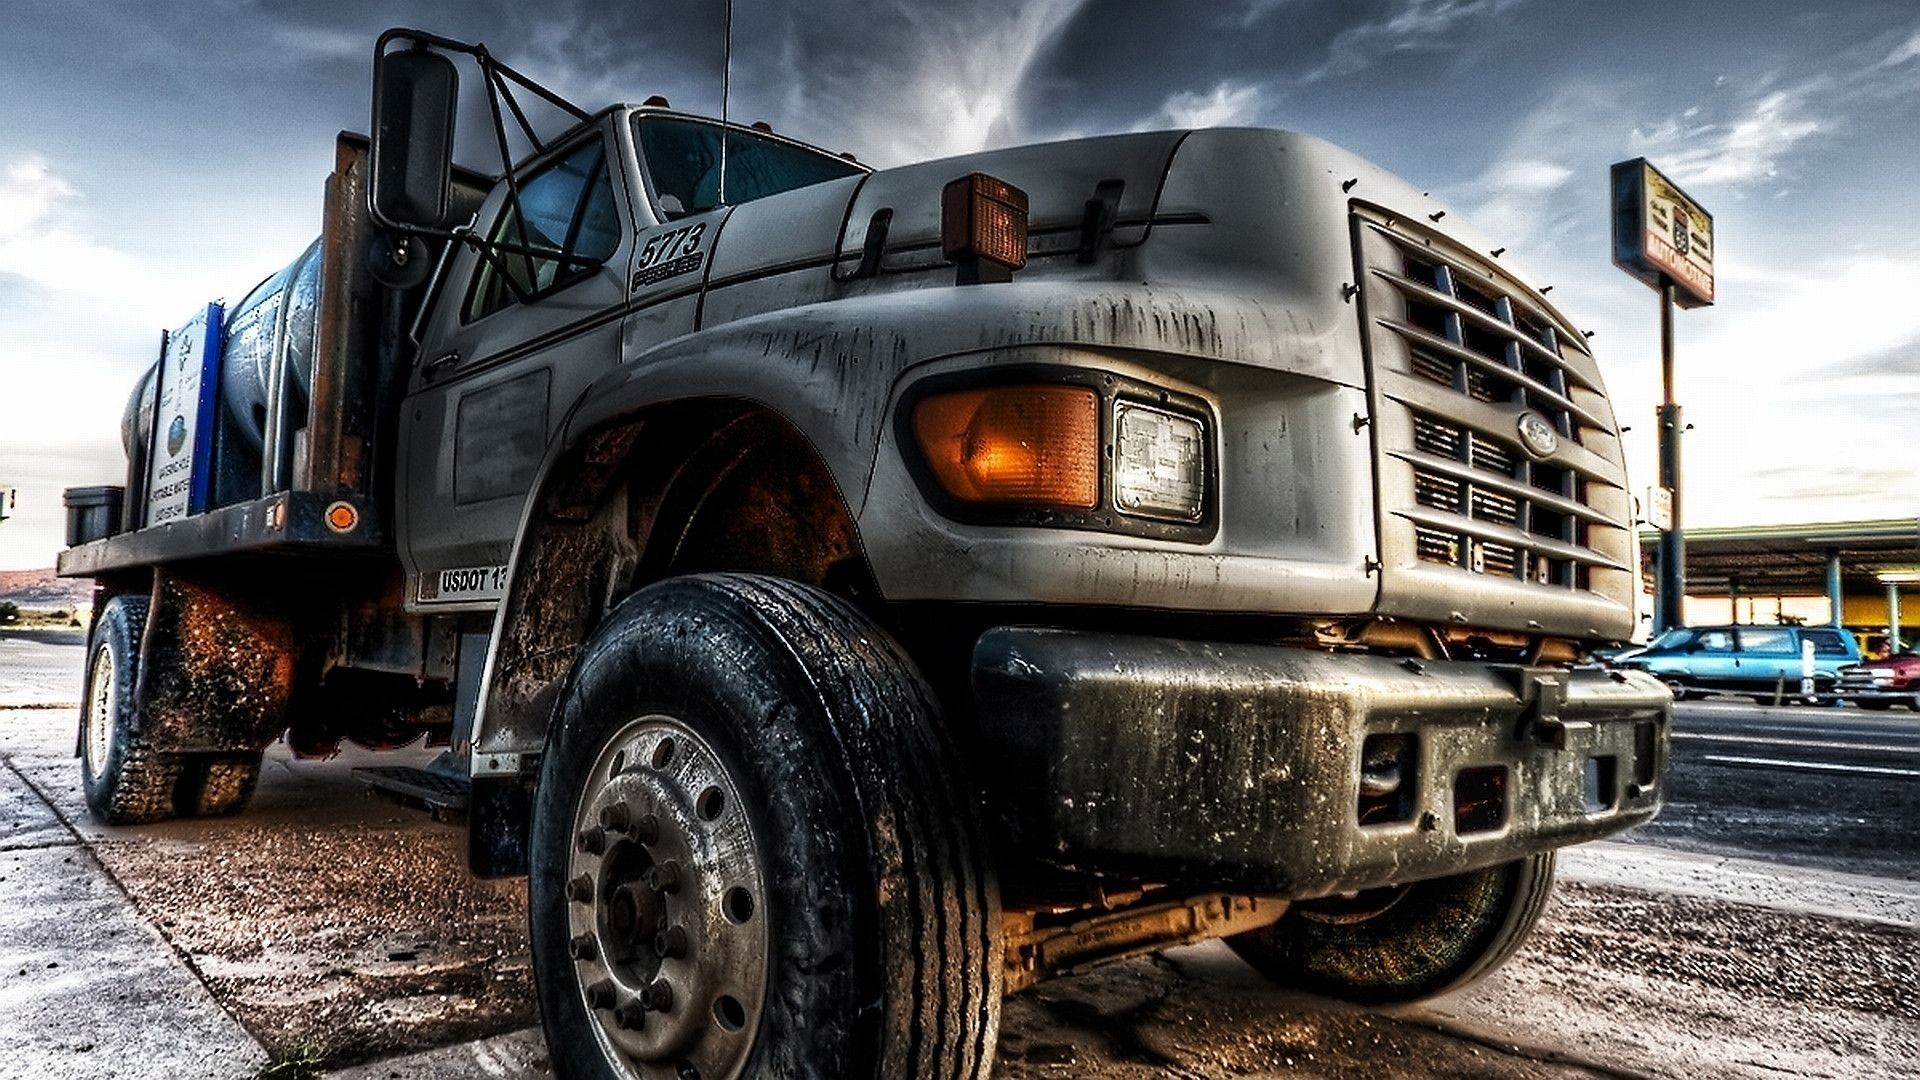 100 Truck Pictures  Download Free Images on Unsplash